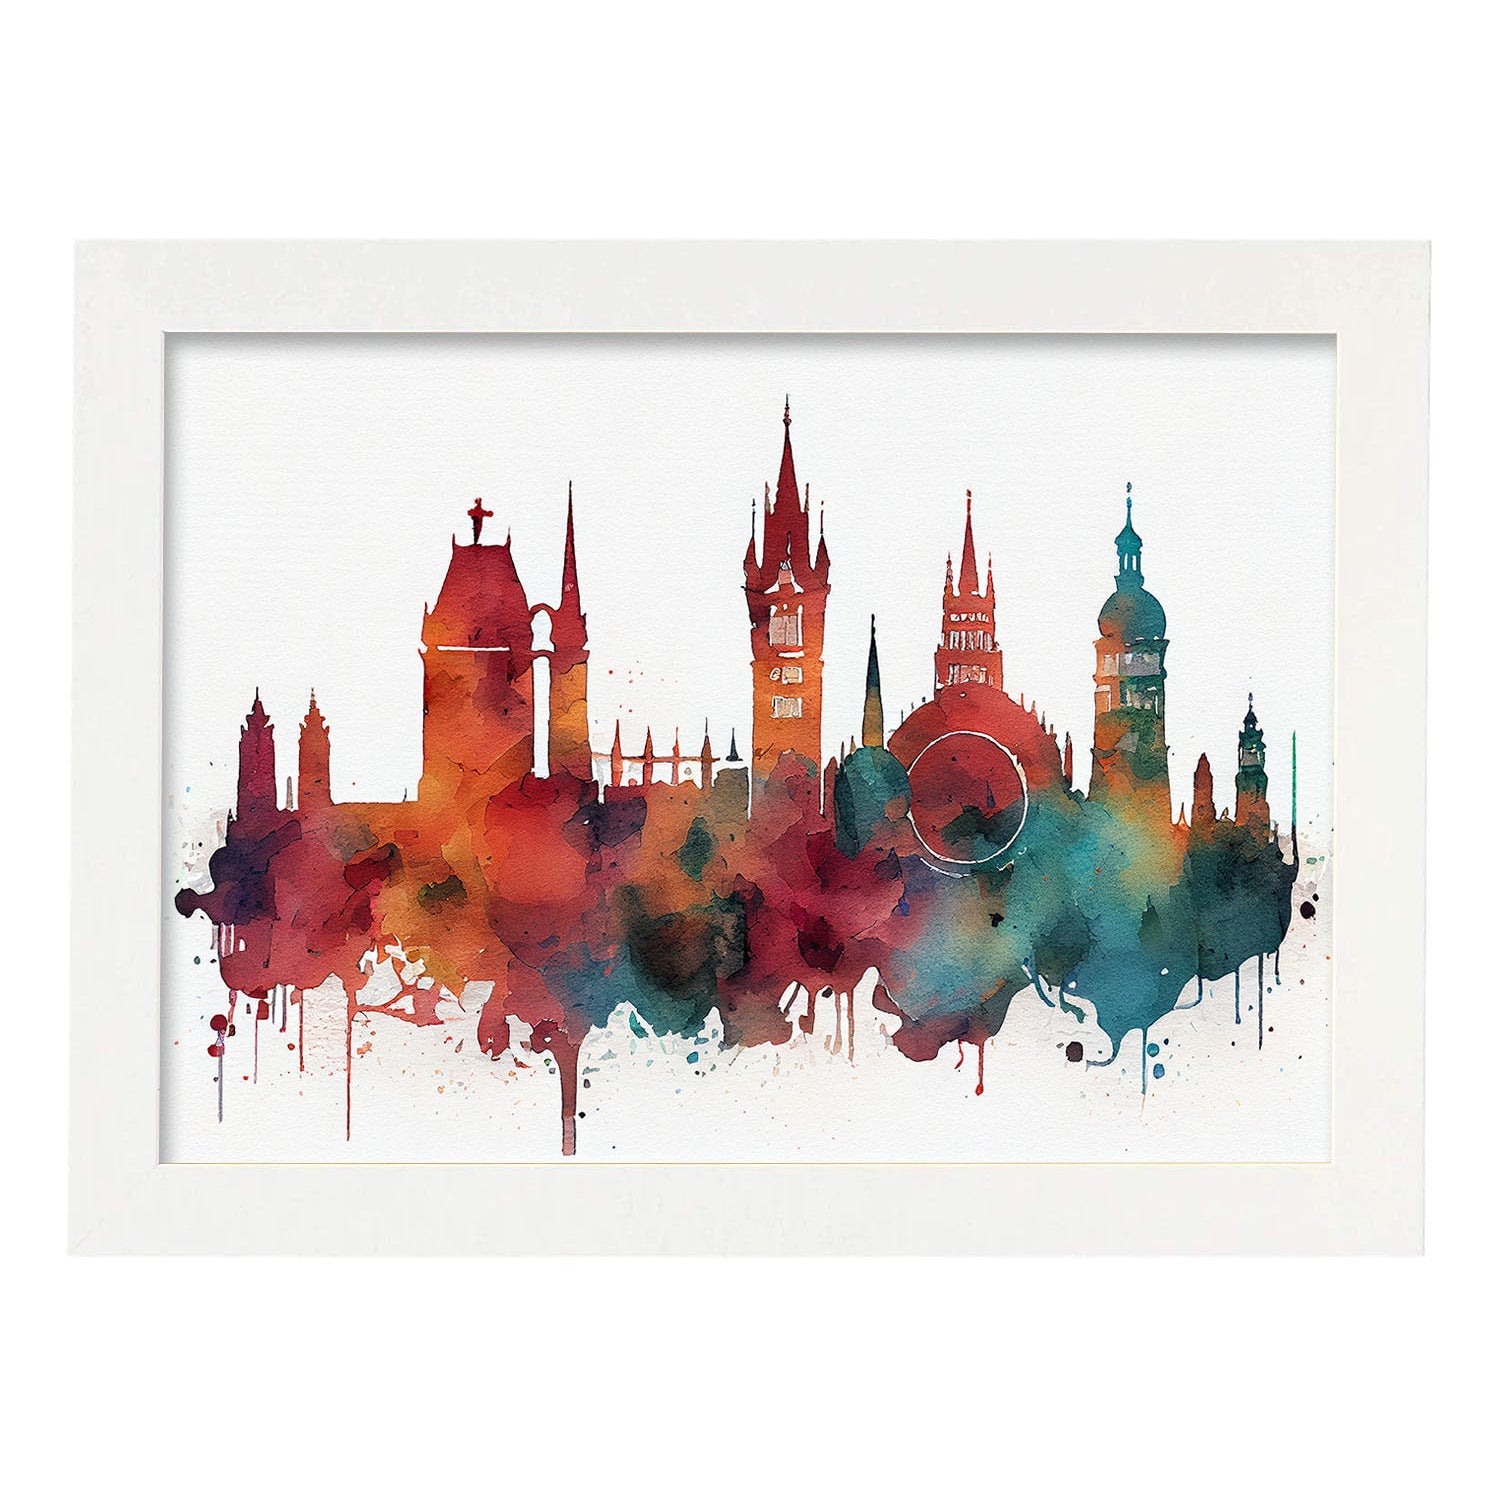 Nacnic watercolor of a skyline of the city of Munich. Aesthetic Wall Art Prints for Bedroom or Living Room Design.-Artwork-Nacnic-A4-Marco Blanco-Nacnic Estudio SL